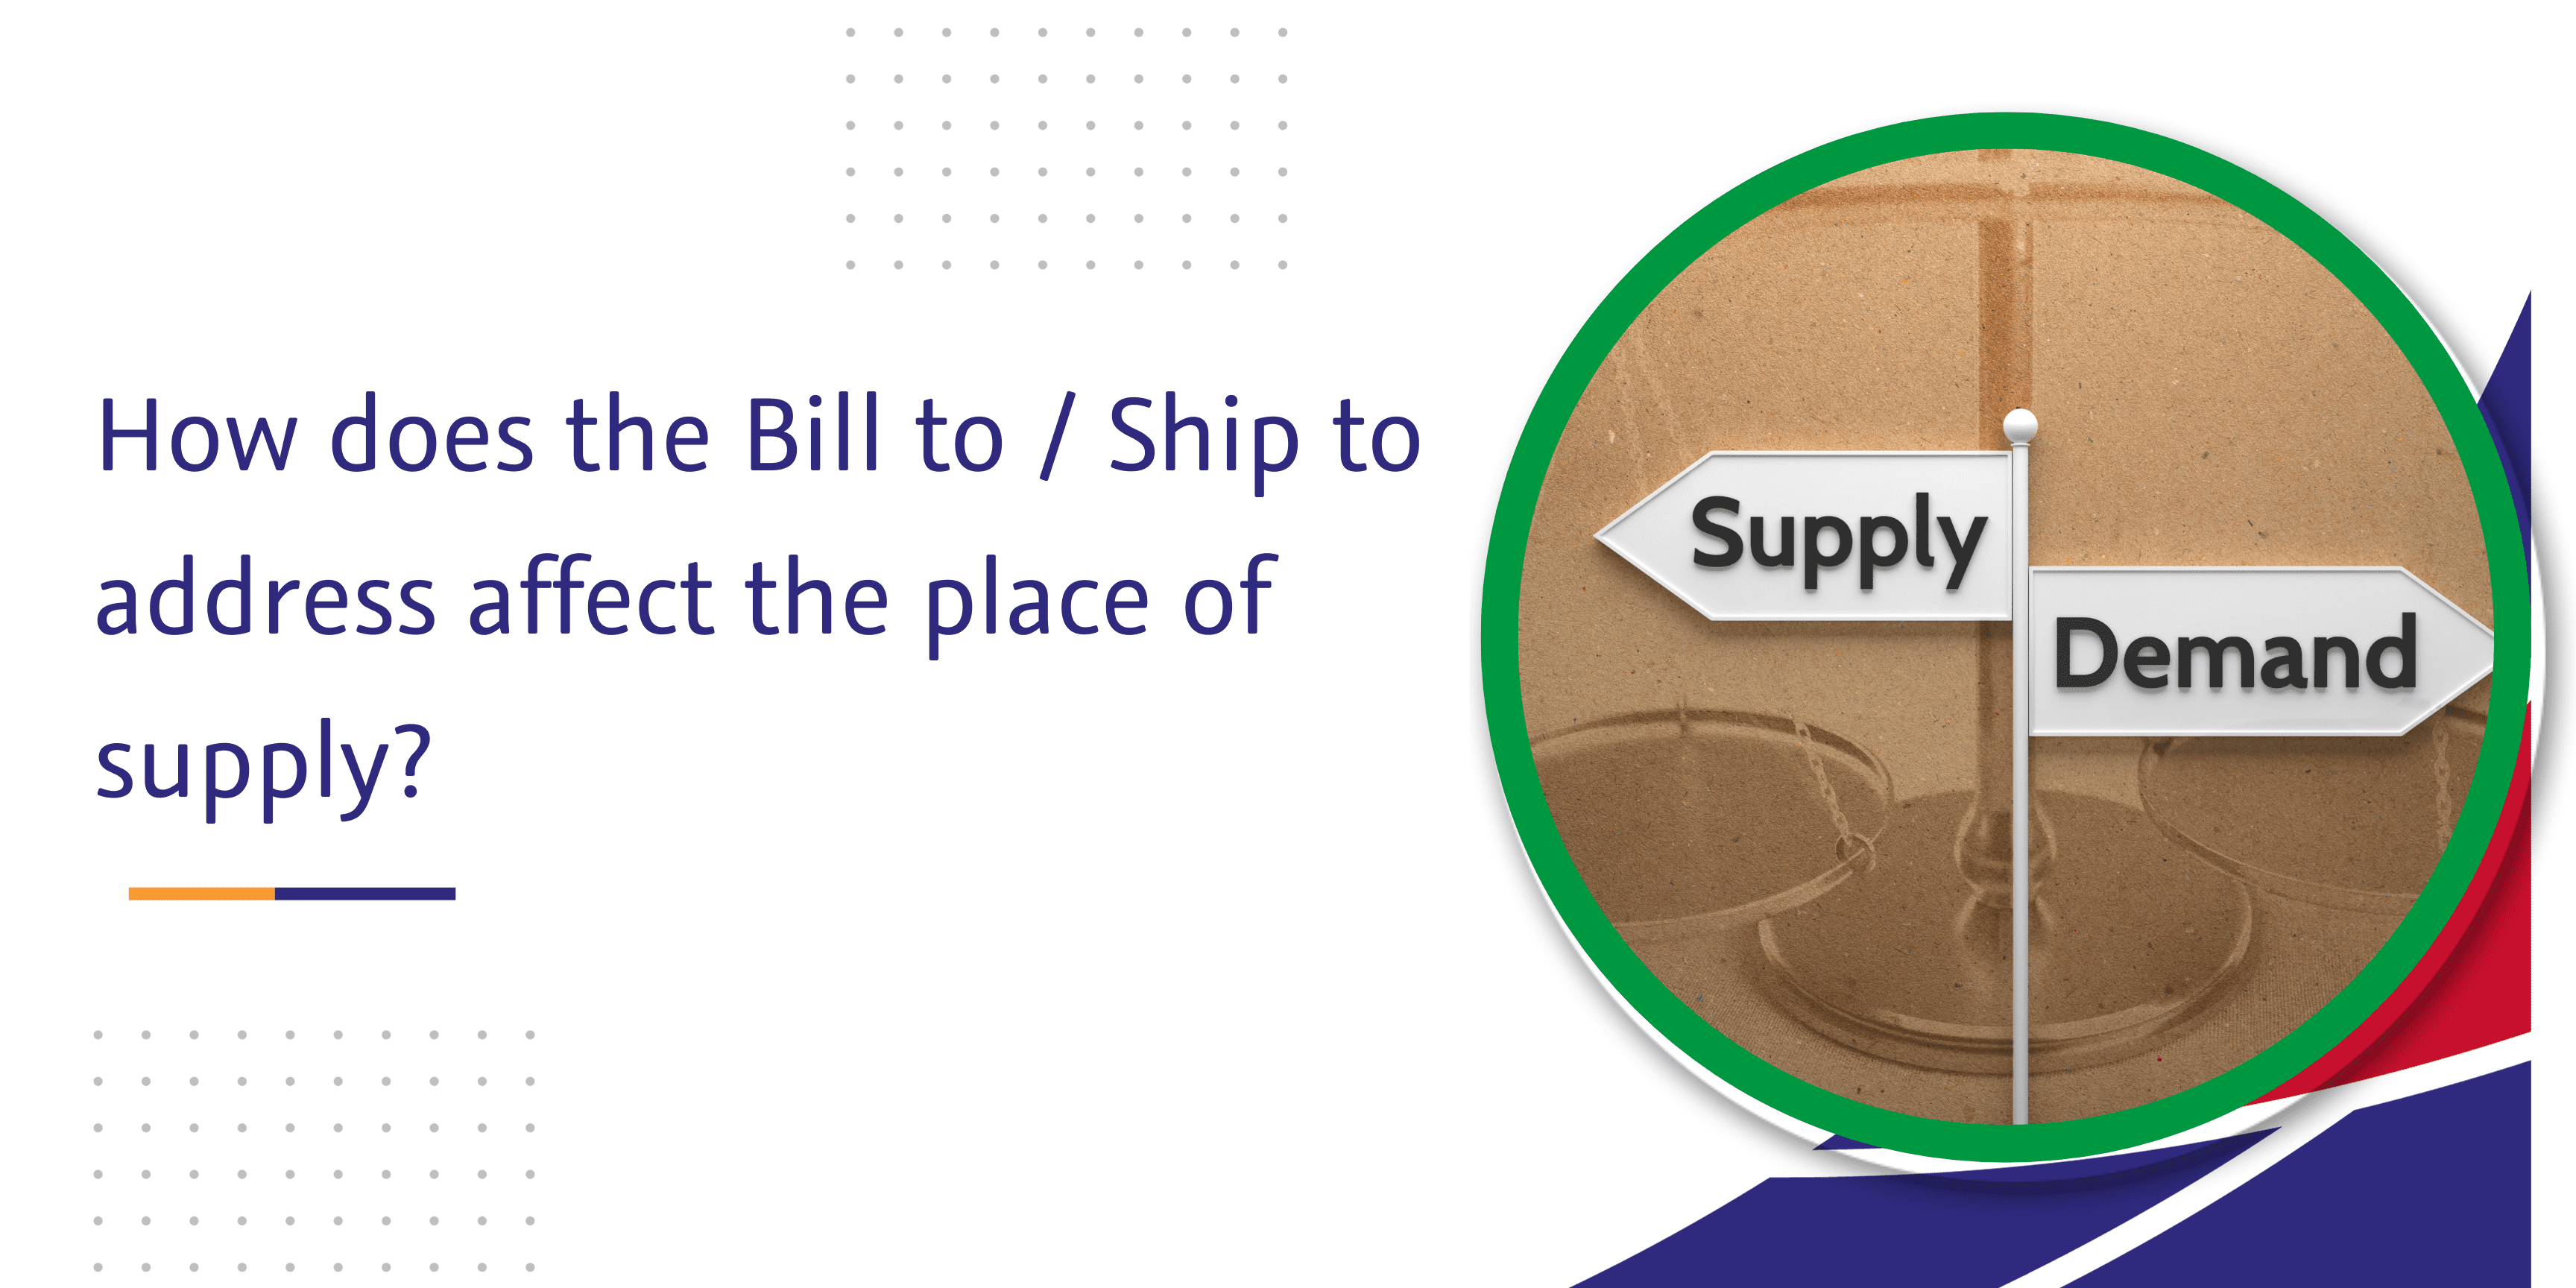 How does the Bill to / Ship to address affect the place of supply?